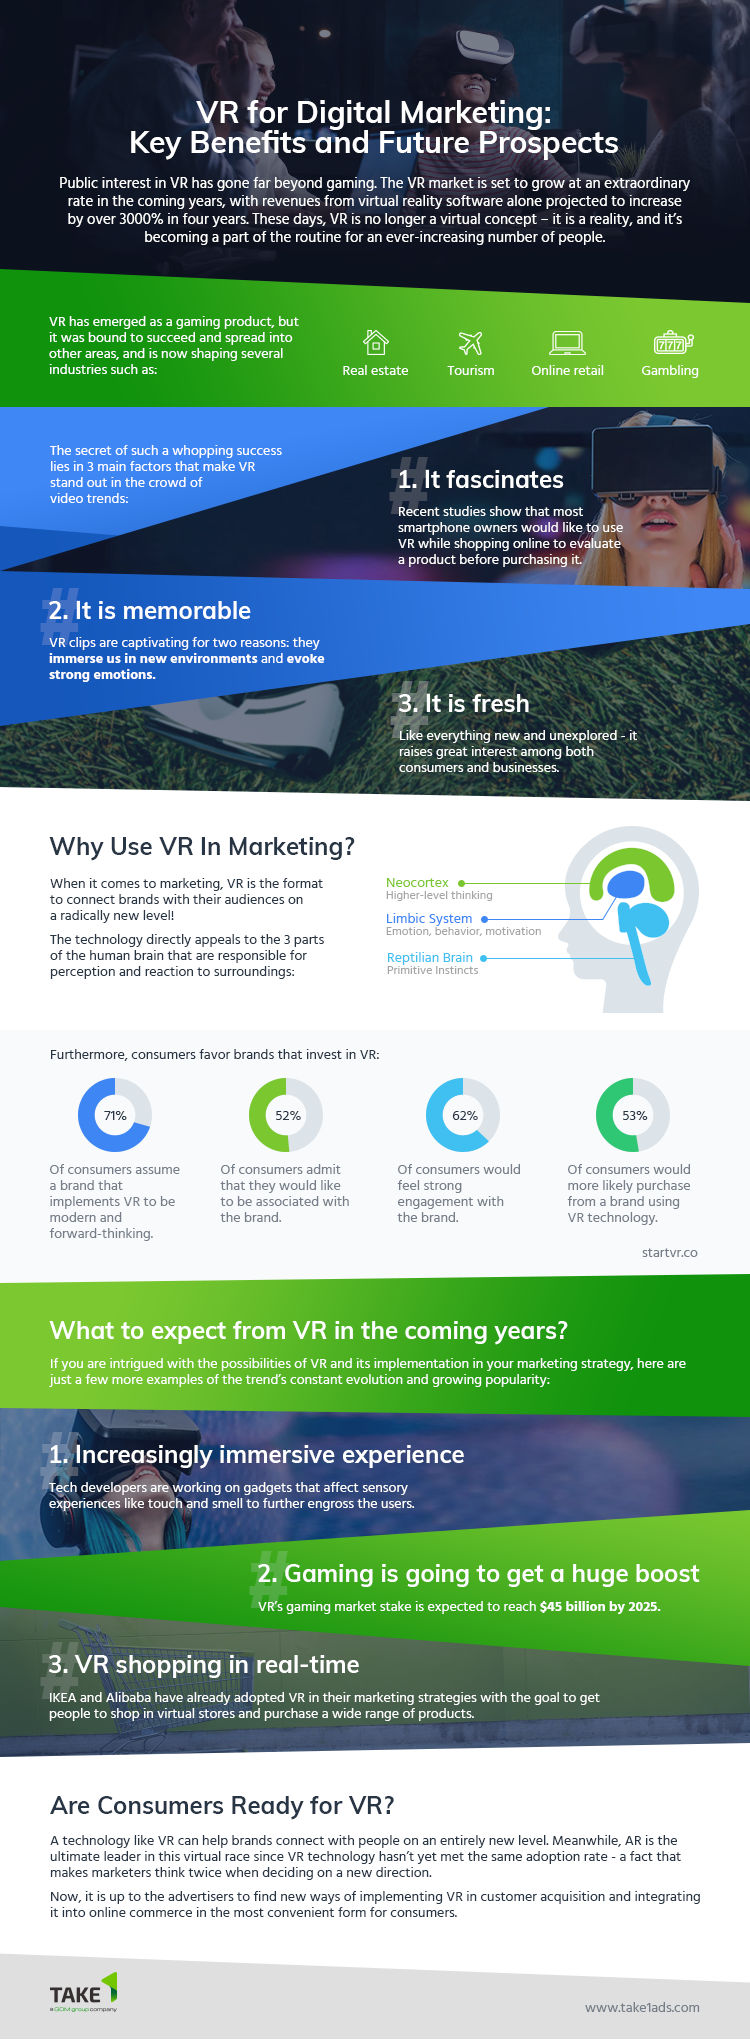 How to Use Virtual Reality in Your Digital Marketing [Infographic]